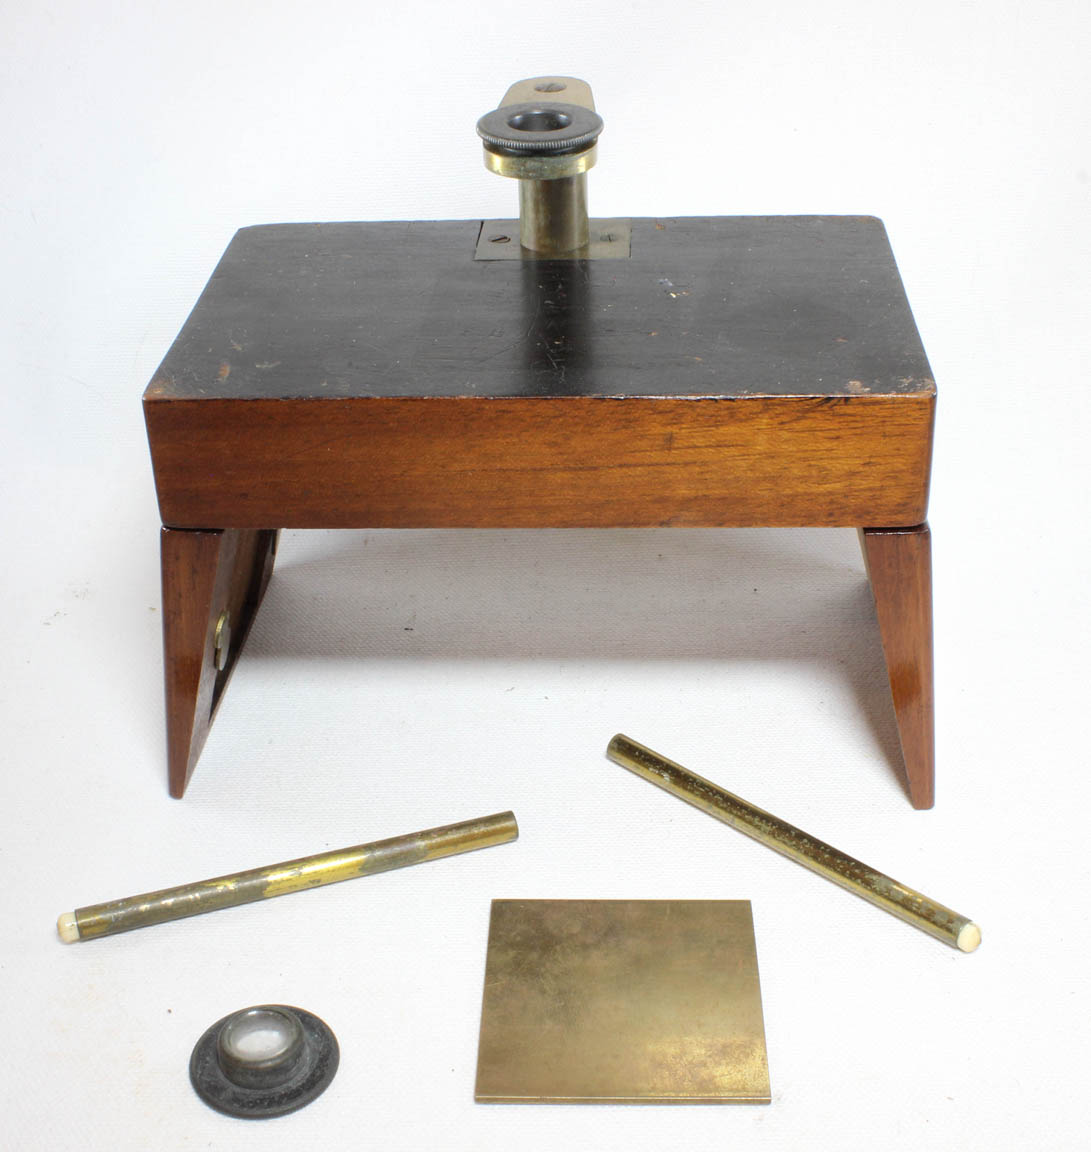 Queckett Dissecting Microscope, early form